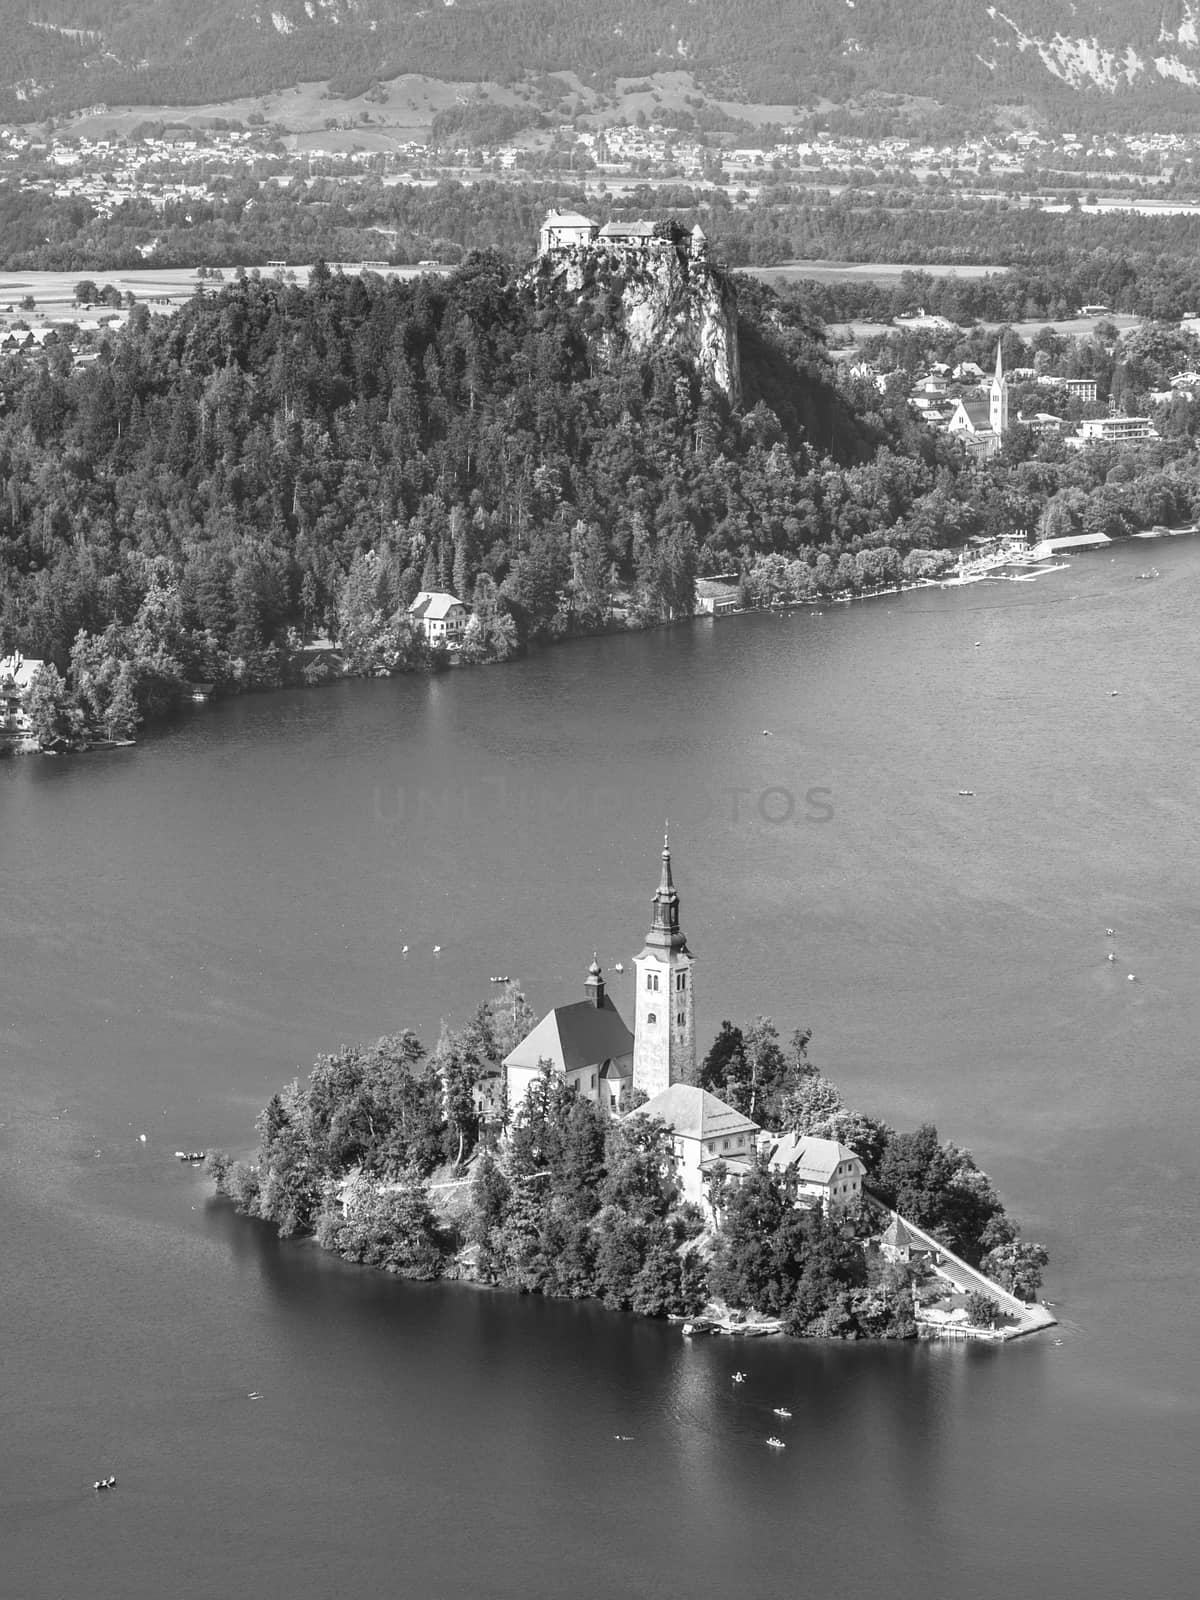 Lake Bled with St Mary's church on the island and Bled castle, Slovenia. Black and white image.